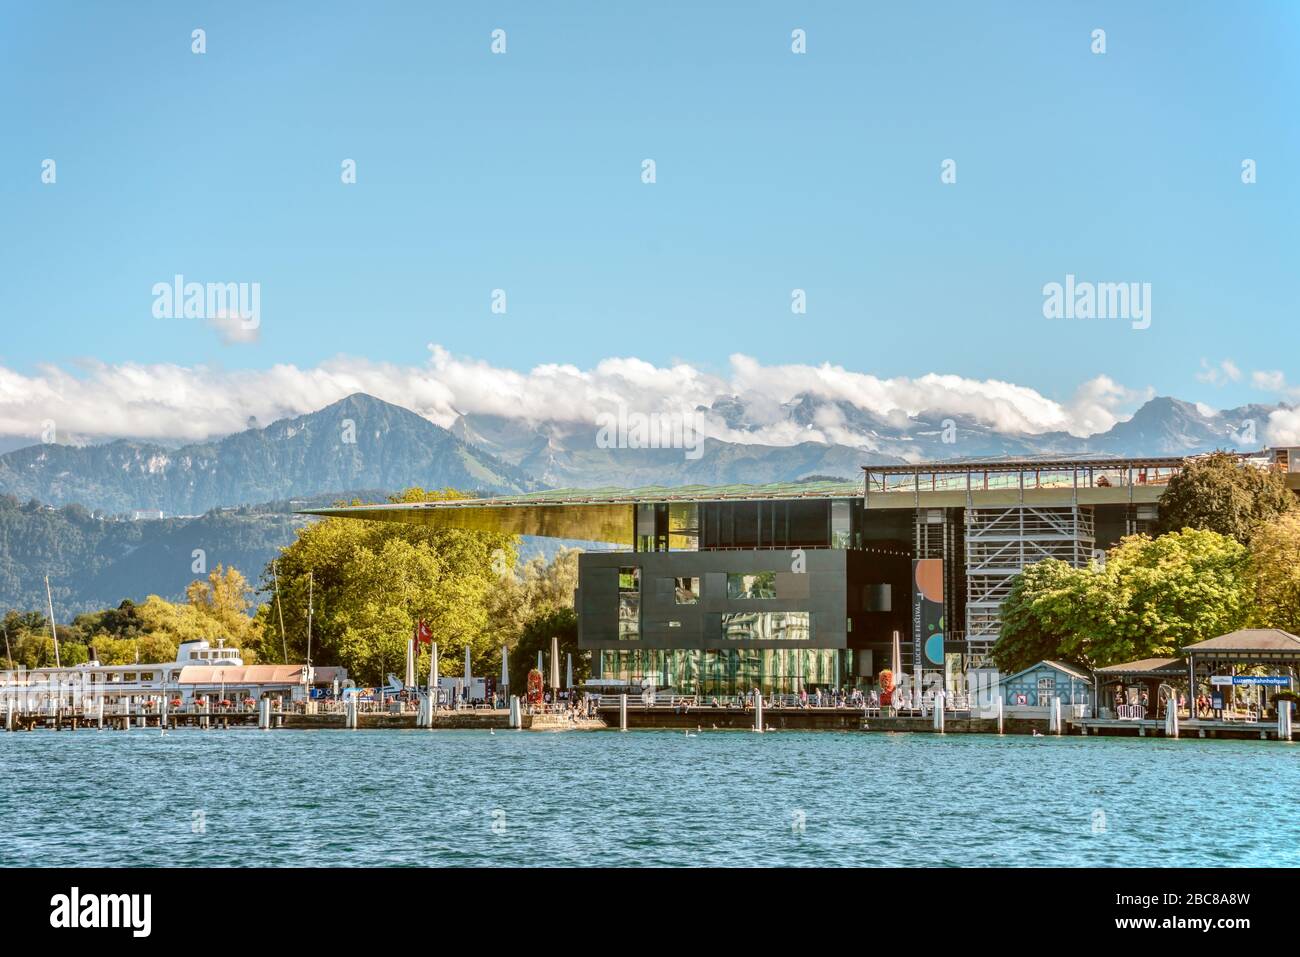 Lucerne Culture and Congress Centre at Lake Lucerne, Switzerland Stock Photo